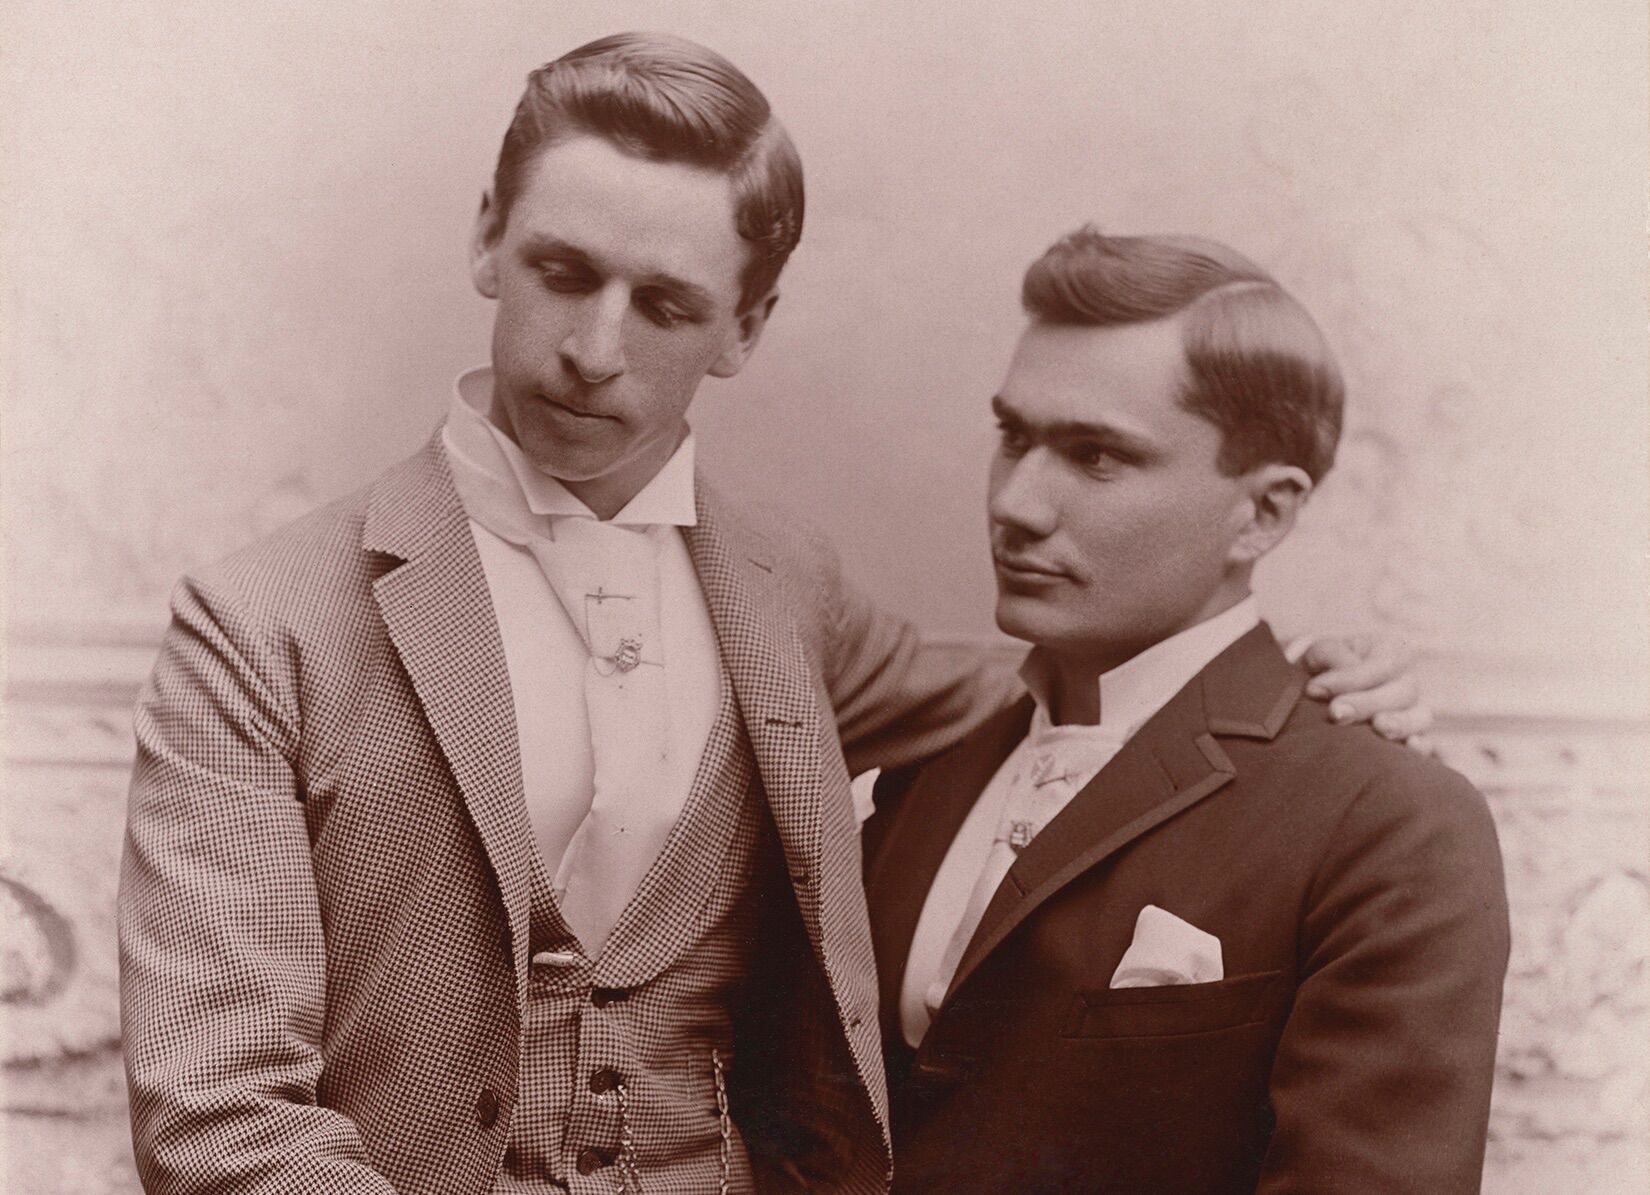 Two men pose in the late 1800s